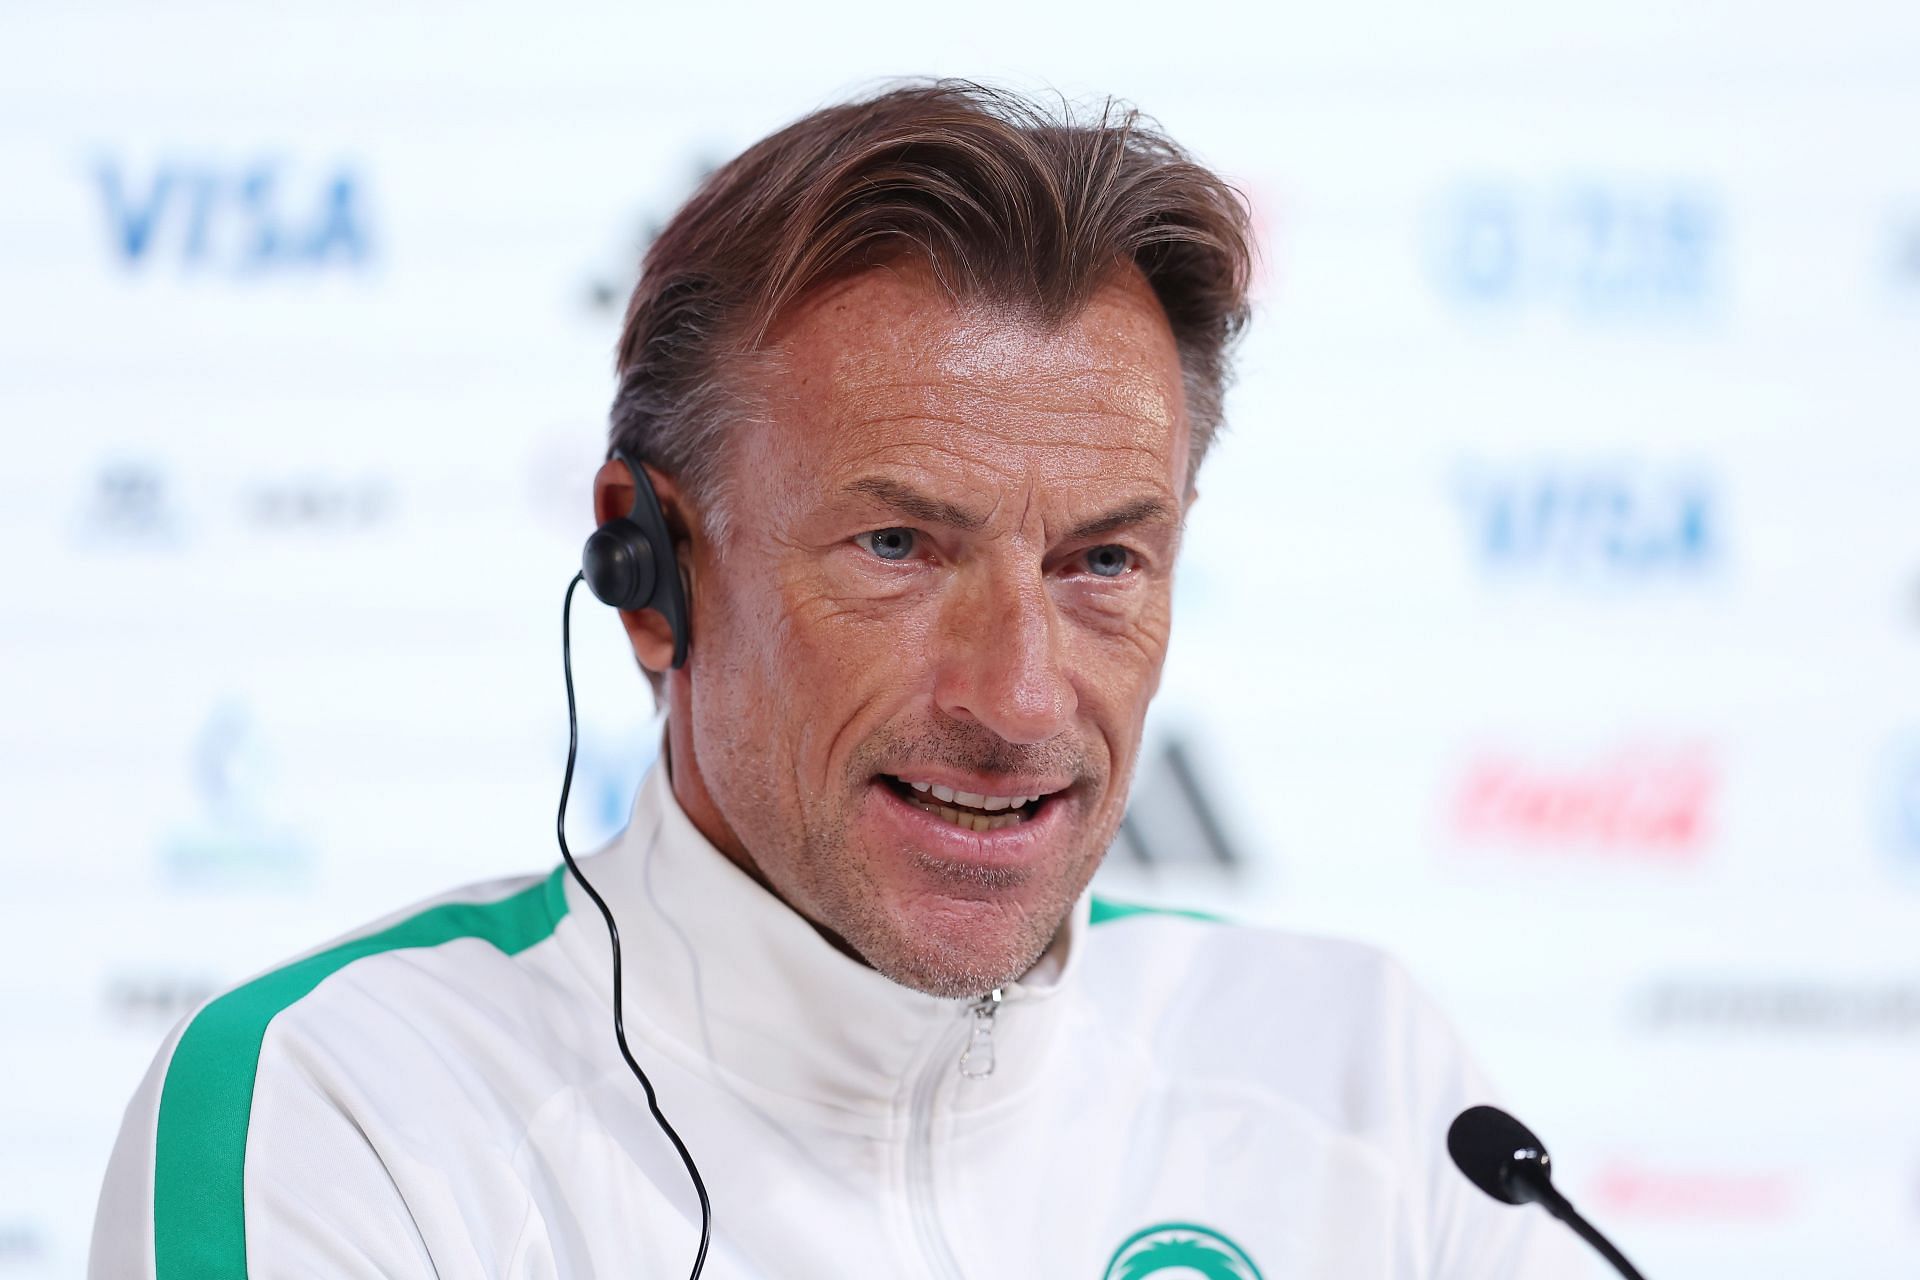 The Saudi Arabia head coach Herve Renard has denied claims that his entire  team was being gifted Rolls Royce by the country's royal family…